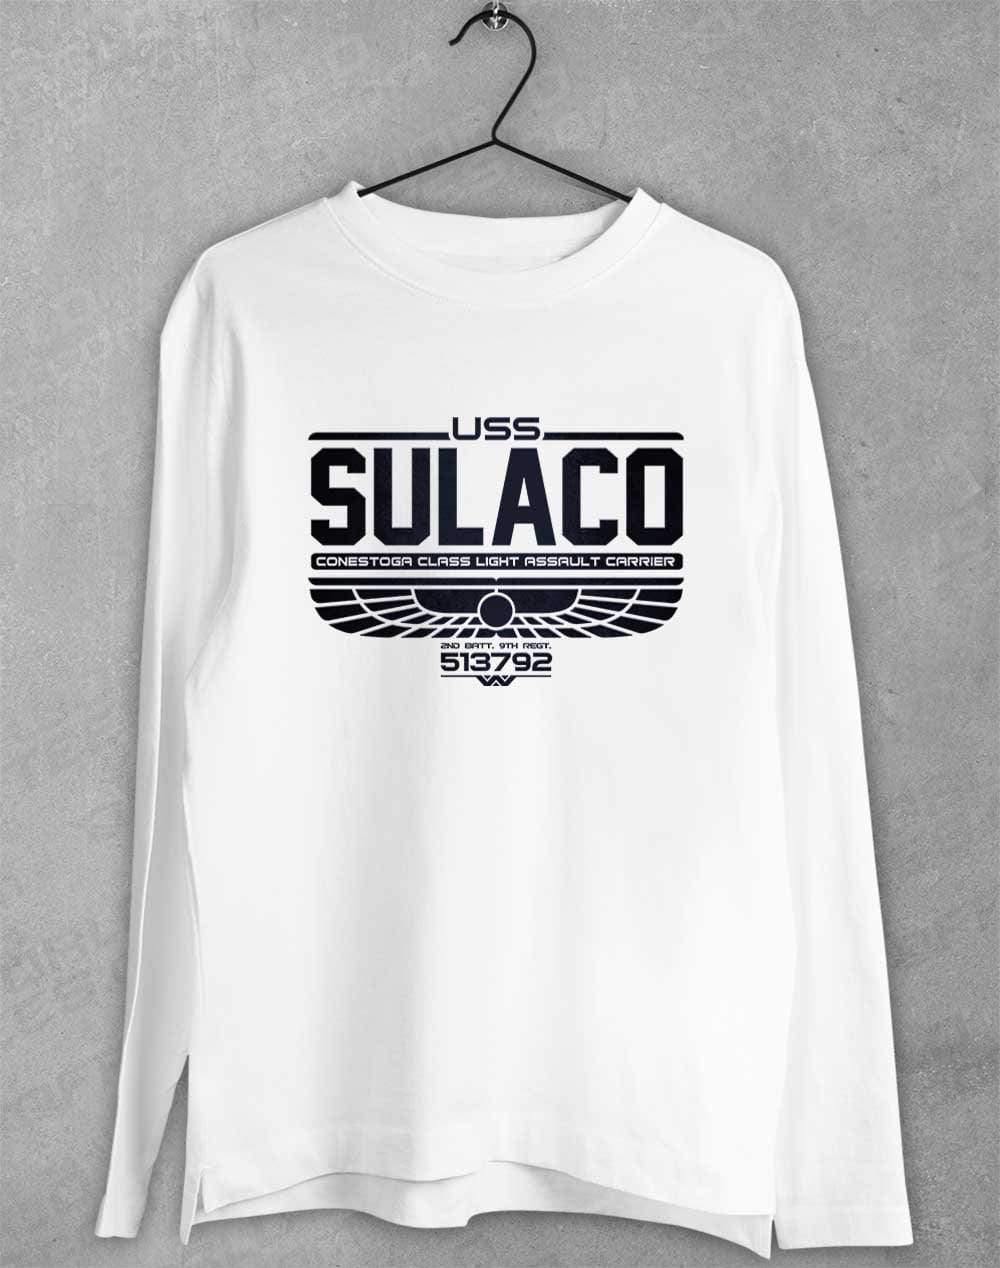 USS Sulaco Long Sleeve T-Shirt S / White  - Off World Tees